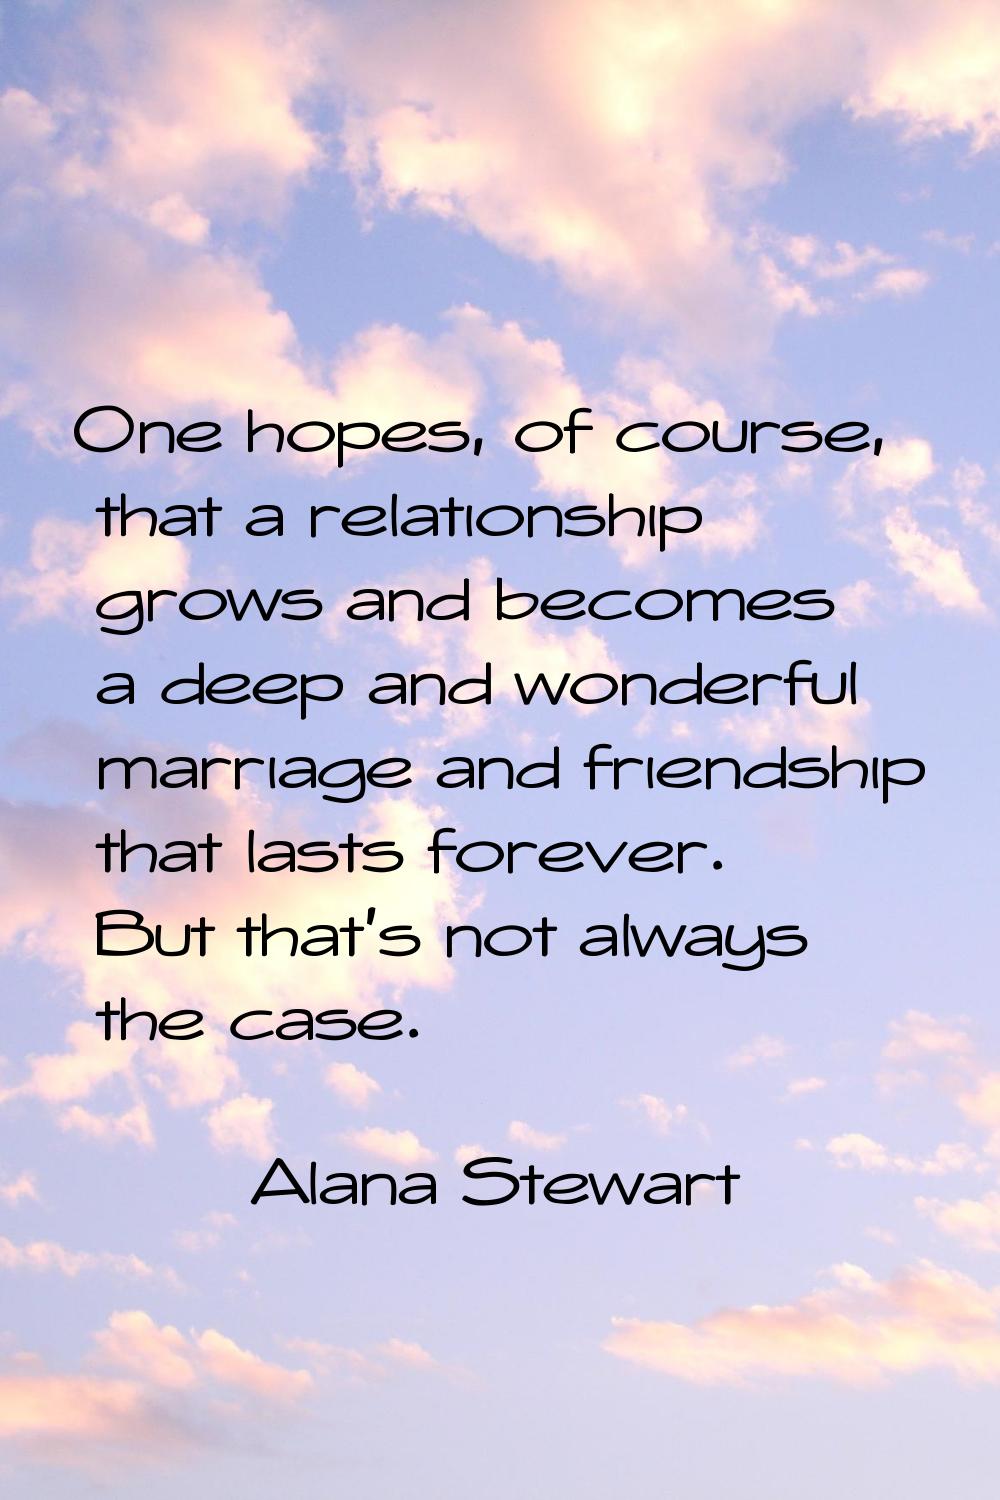 One hopes, of course, that a relationship grows and becomes a deep and wonderful marriage and frien